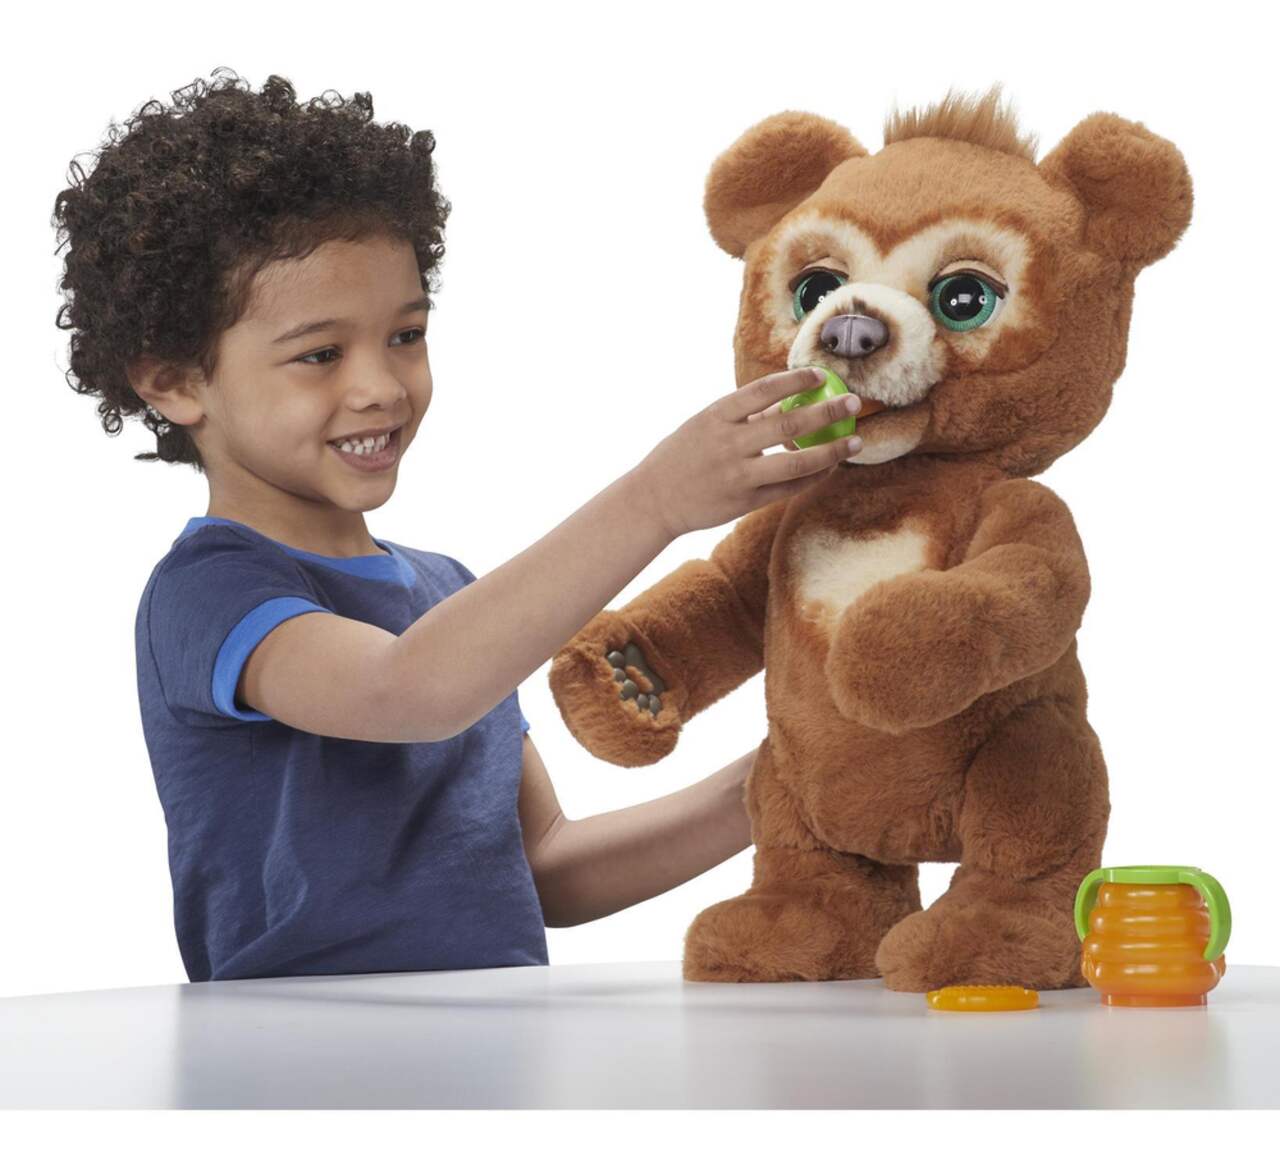 https://media-www.canadiantire.ca/product/seasonal-gardening/toys/preschool-toys-activities/0505938/furreal-cub-0c2c18d0-6a8e-4649-8c05-815ed78cc475.png?imdensity=1&imwidth=1244&impolicy=mZoom